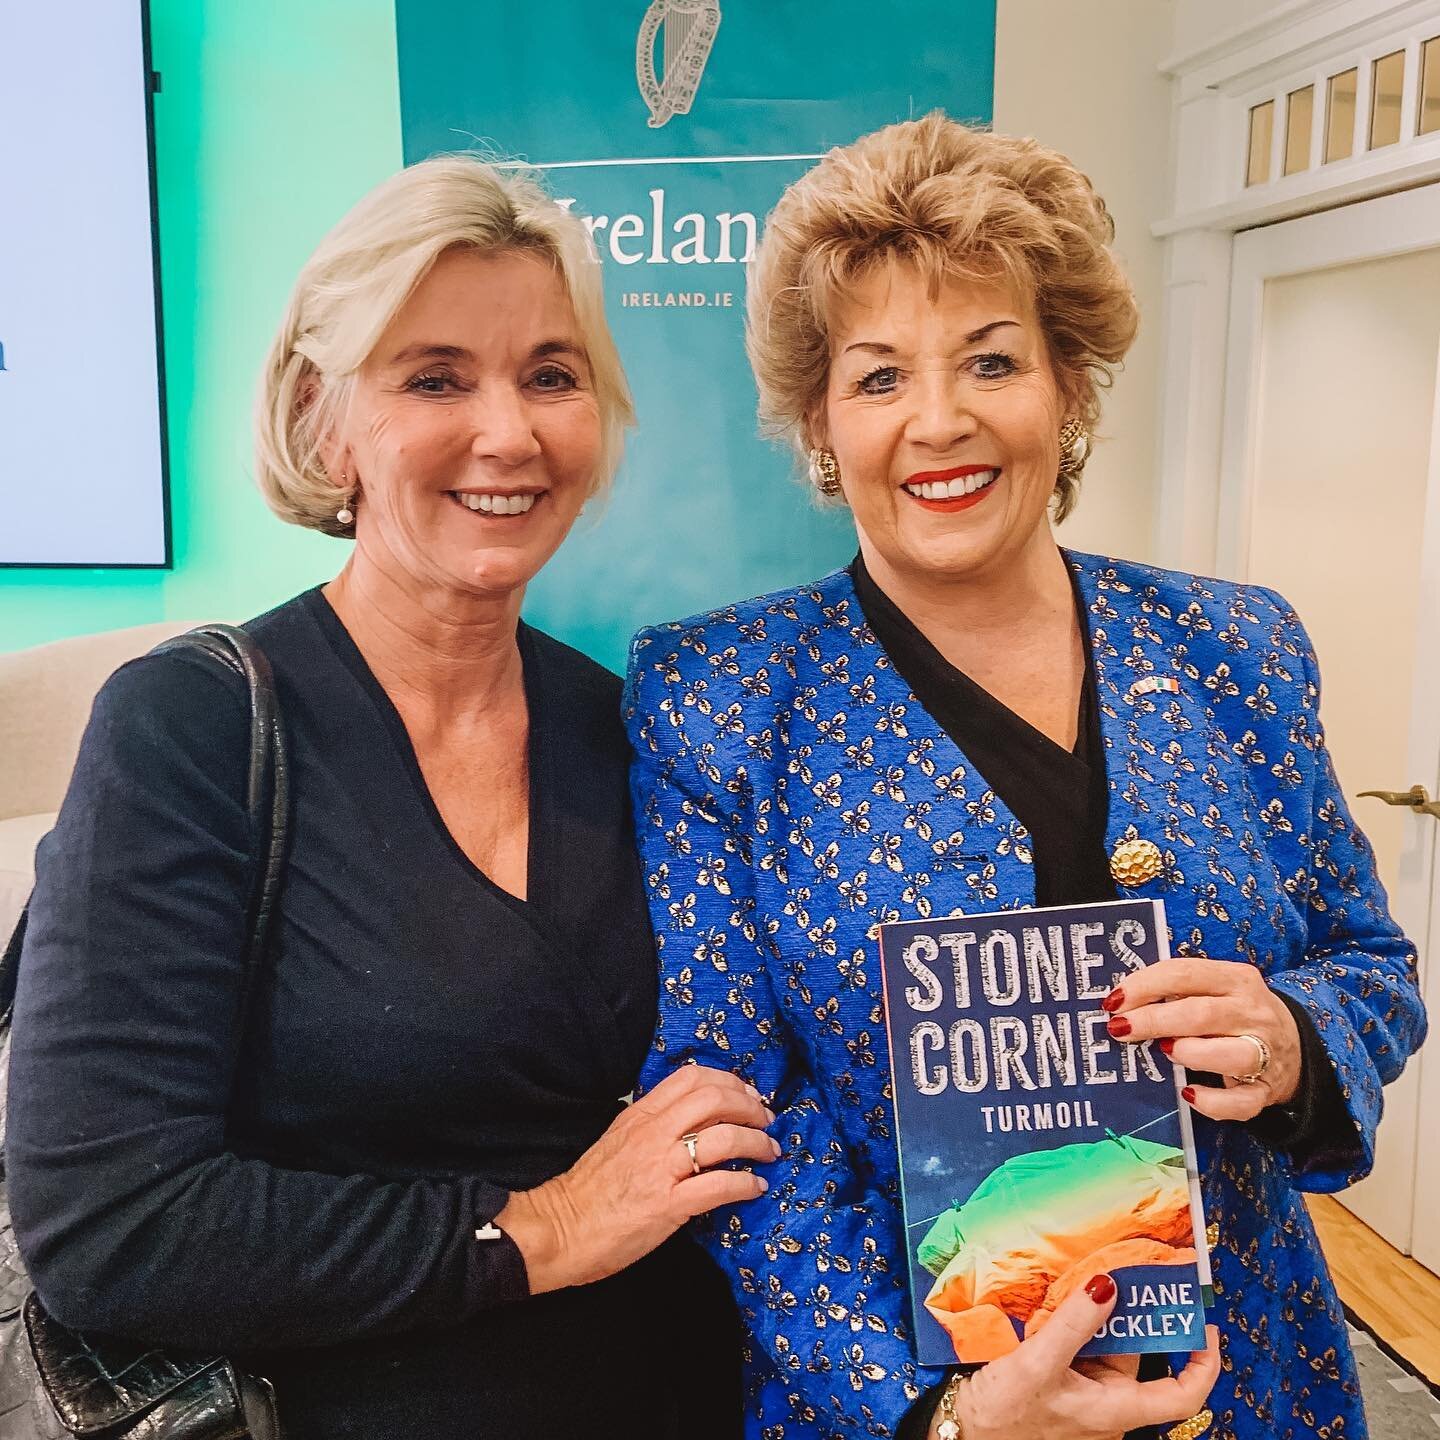 Hello from the &lsquo;city that never sleeps&rsquo; - New York! 

I&rdquo;m here meeting some incredibly interesting people and, of course, to promote the Stones Corner Series. Here I am with Ambassador Geraldine Byrne Nason, Ireland's 19th Ambassado